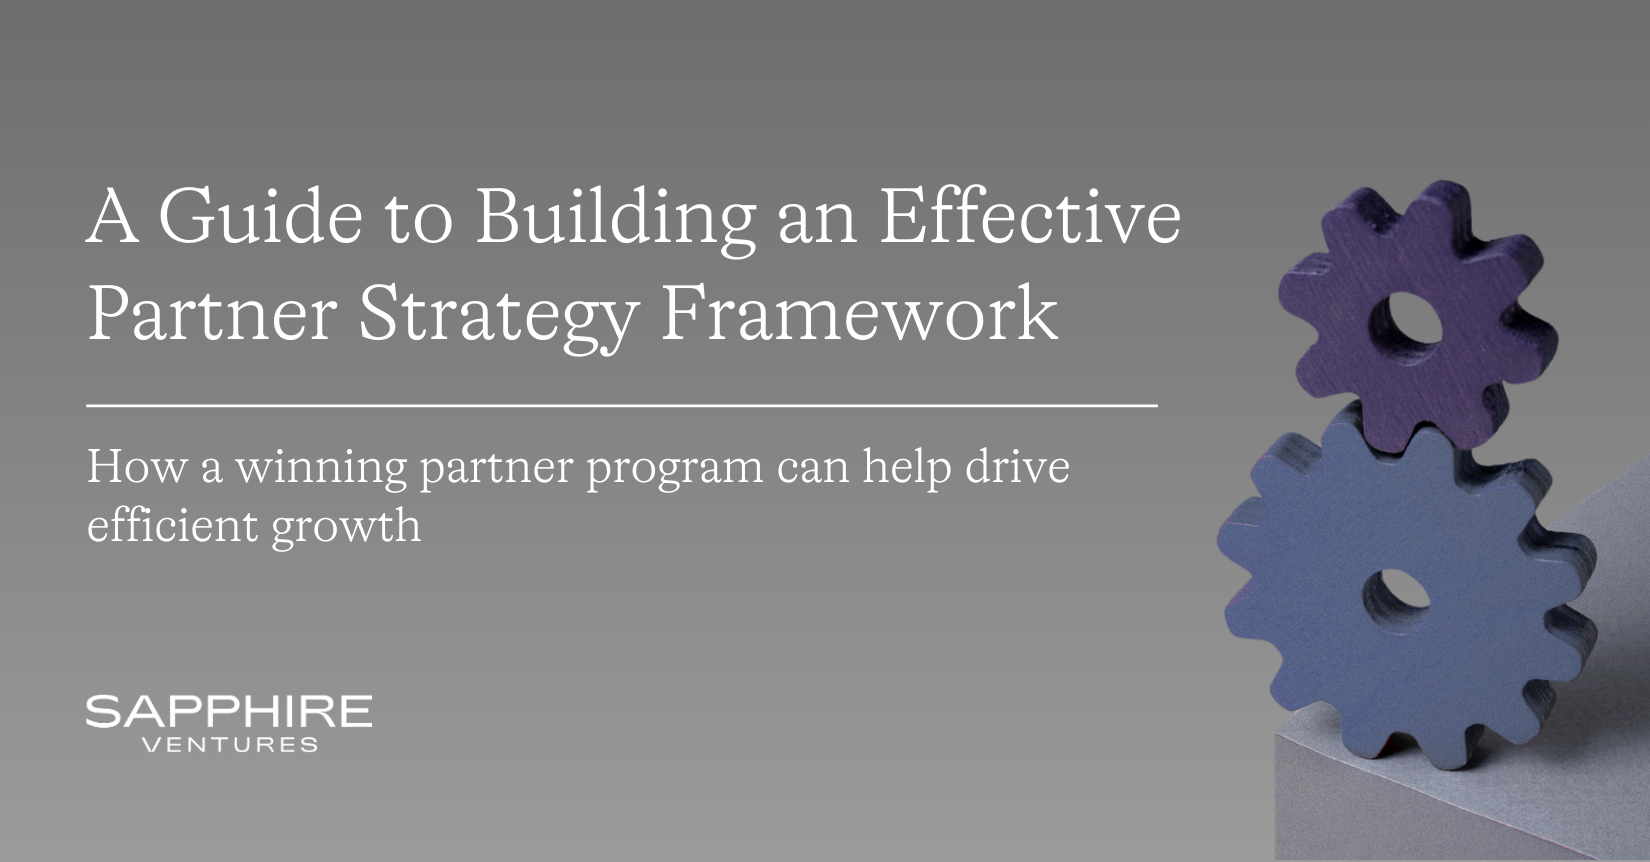 Featured Resources Section - Partner Strategy Framework Playbook